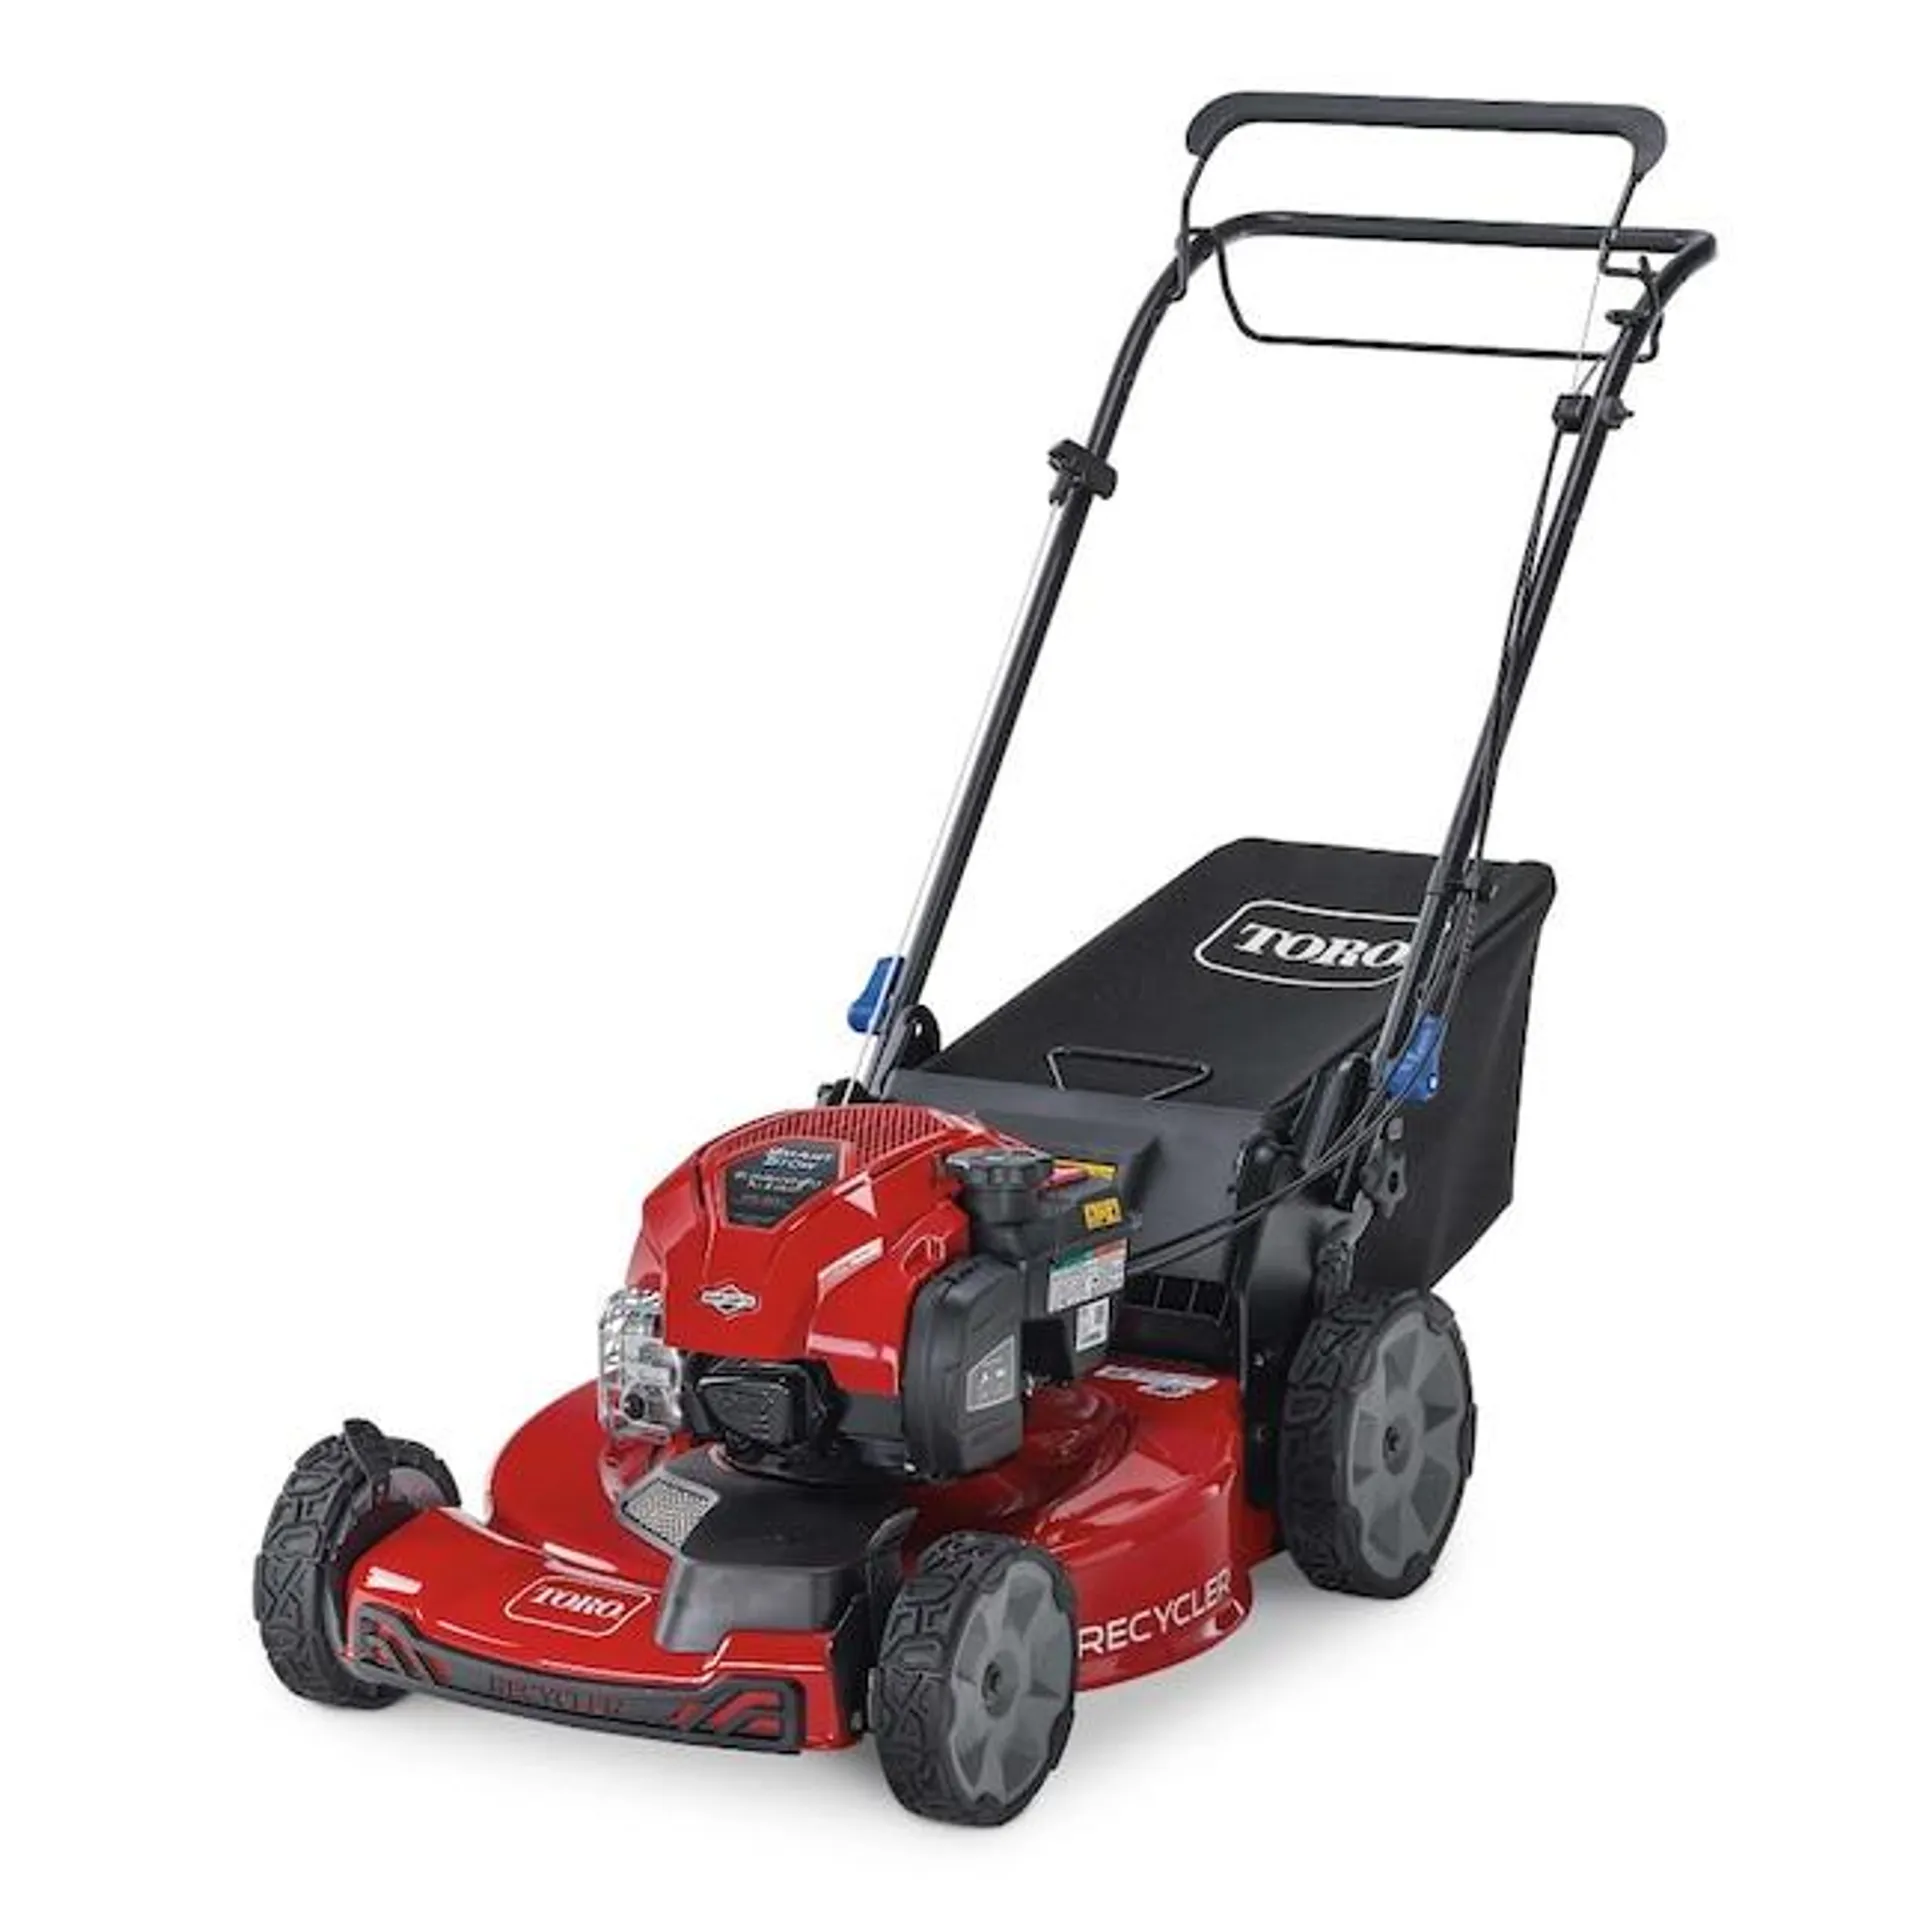 Toro Recycler 22-in Gas Self-propelled Lawn Mower with 150-cc Briggs and Stratton Engine